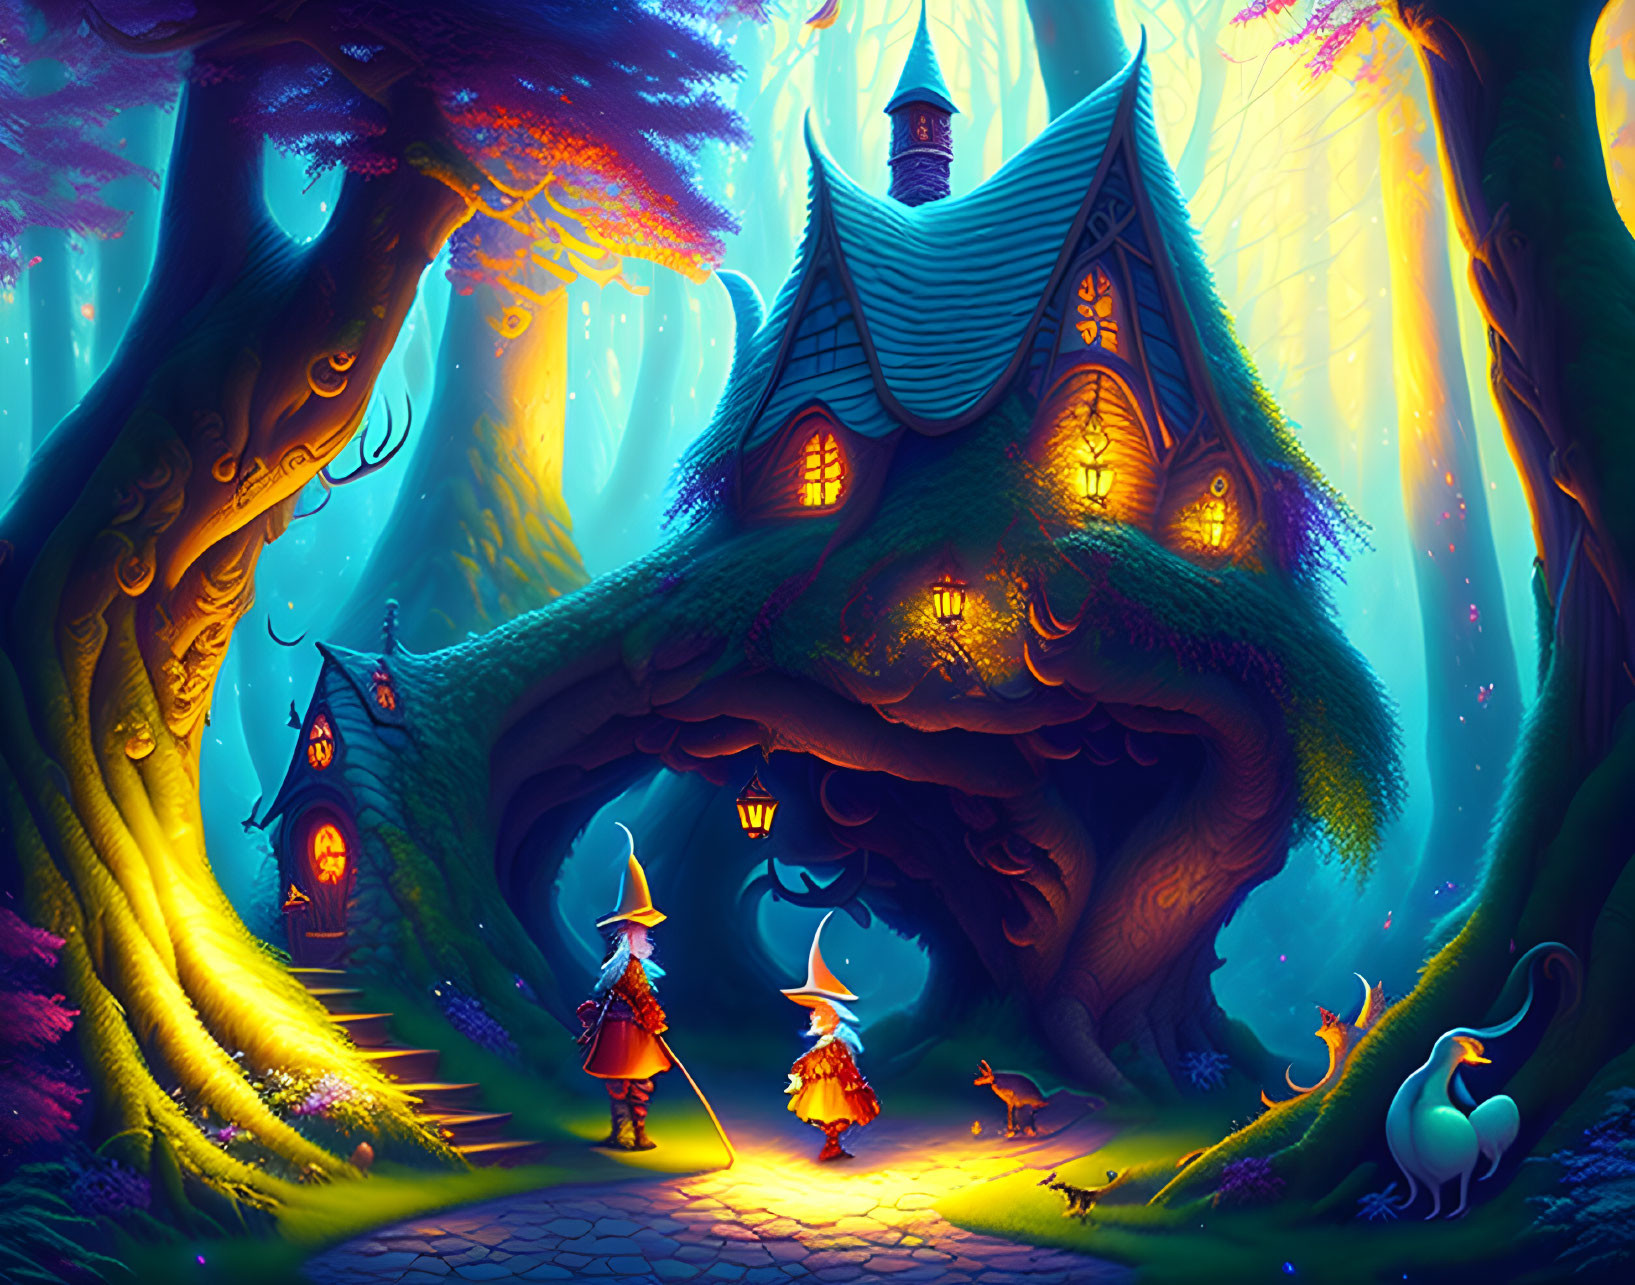 Enchanting forest scene: witches, magical treehouse, curious cat